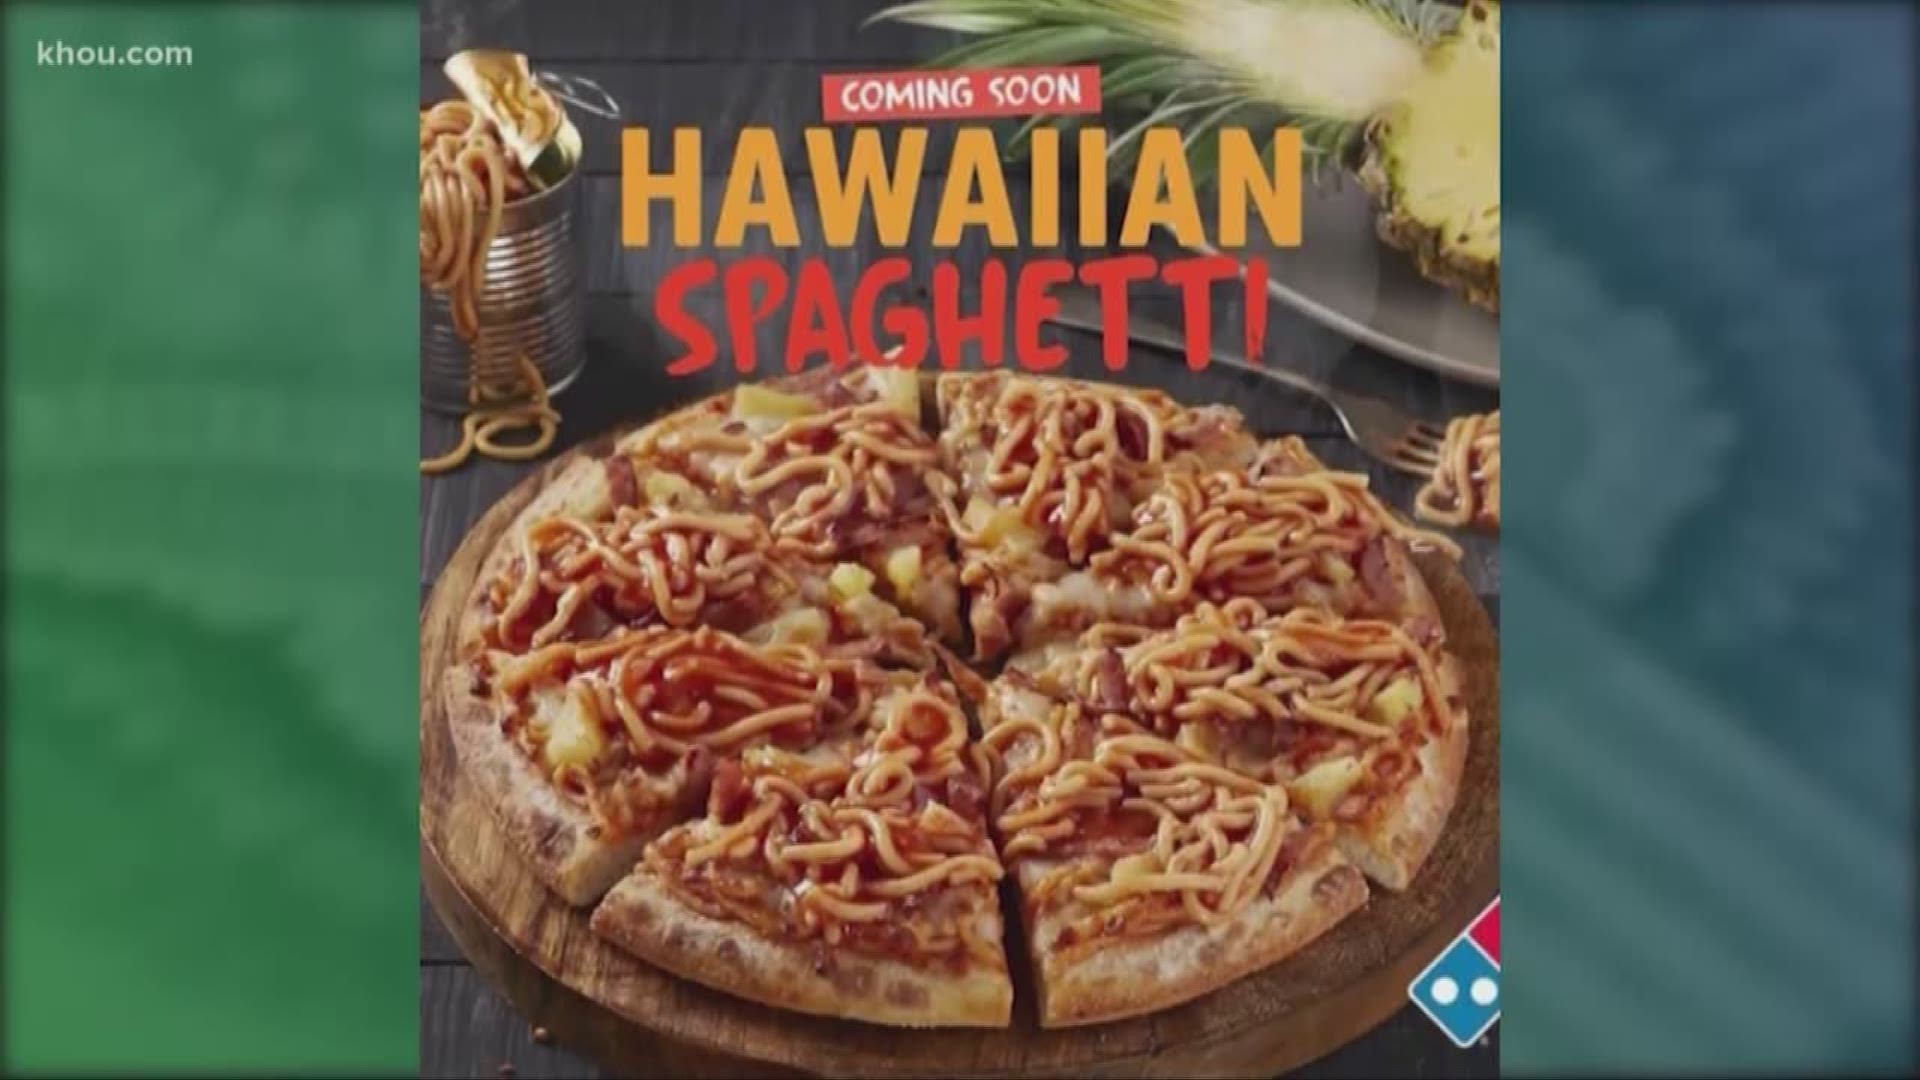 Domino's has teamed up with a food manufacturer to offer Hawaiian pizza with spaghetti on top in New Zealand. No word yet on if it'll hit the U.S., but would you try it?